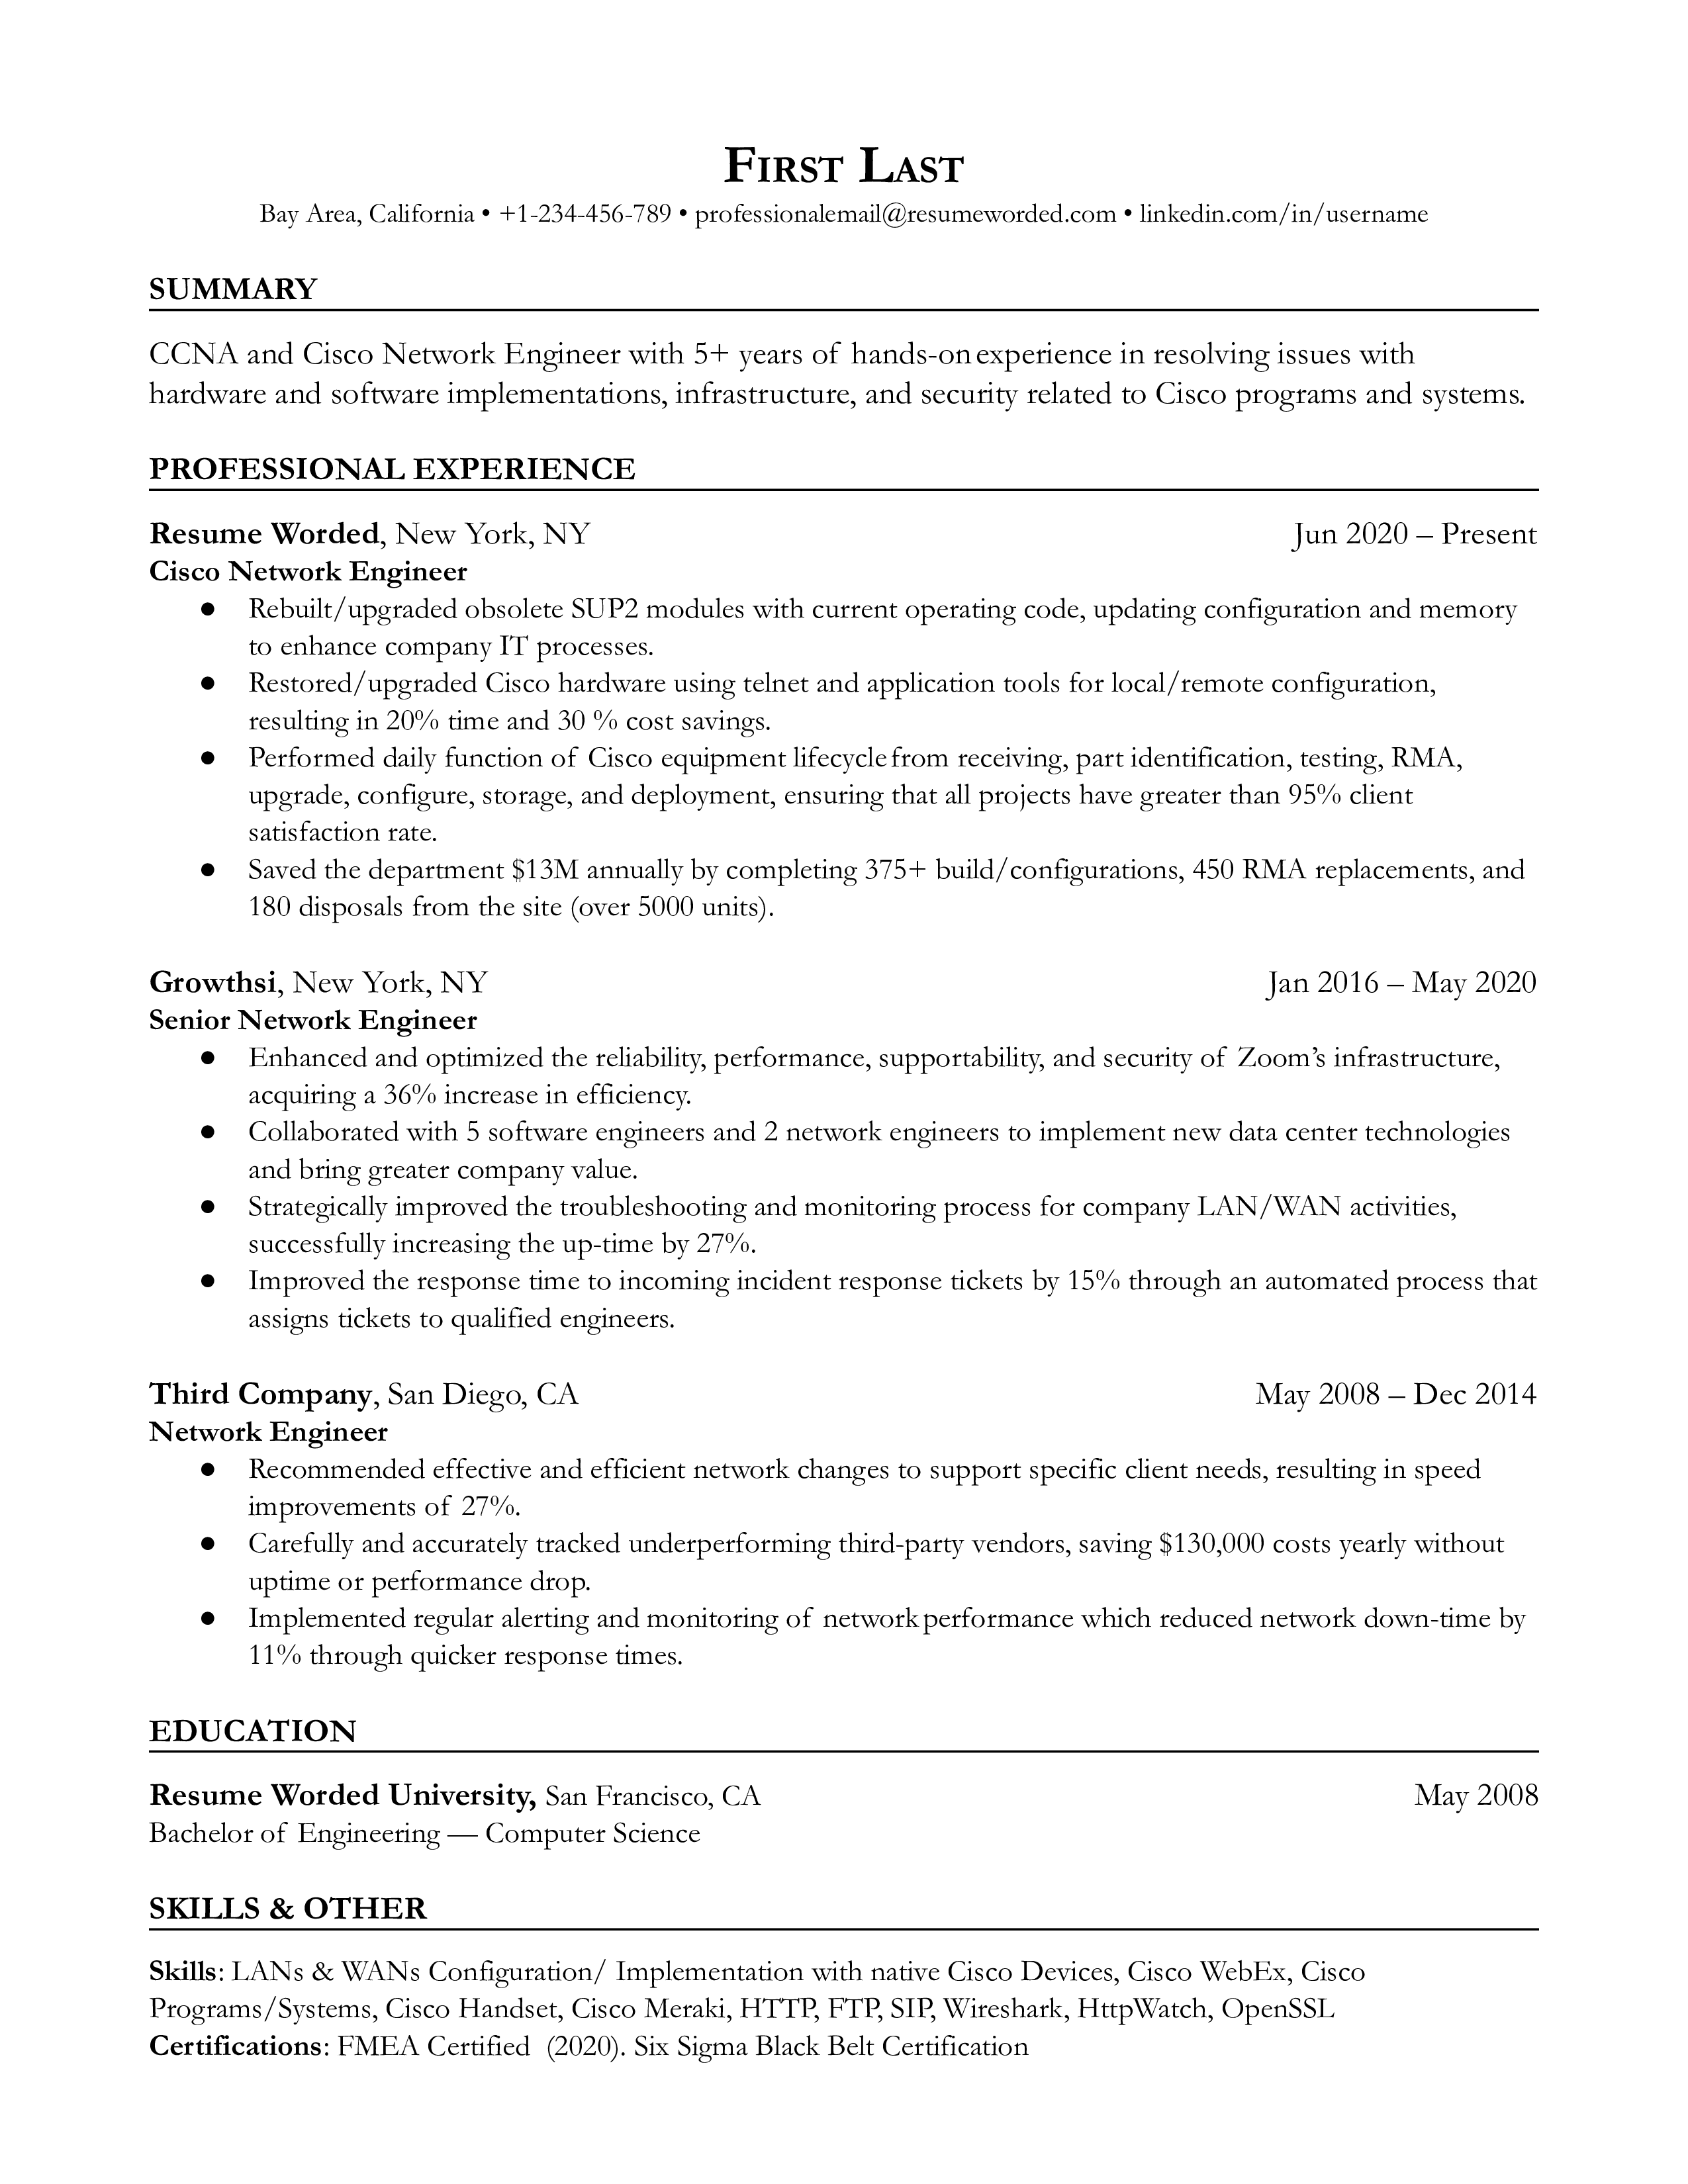 Cisco network engineer resume with CCNA credential and relevant experience